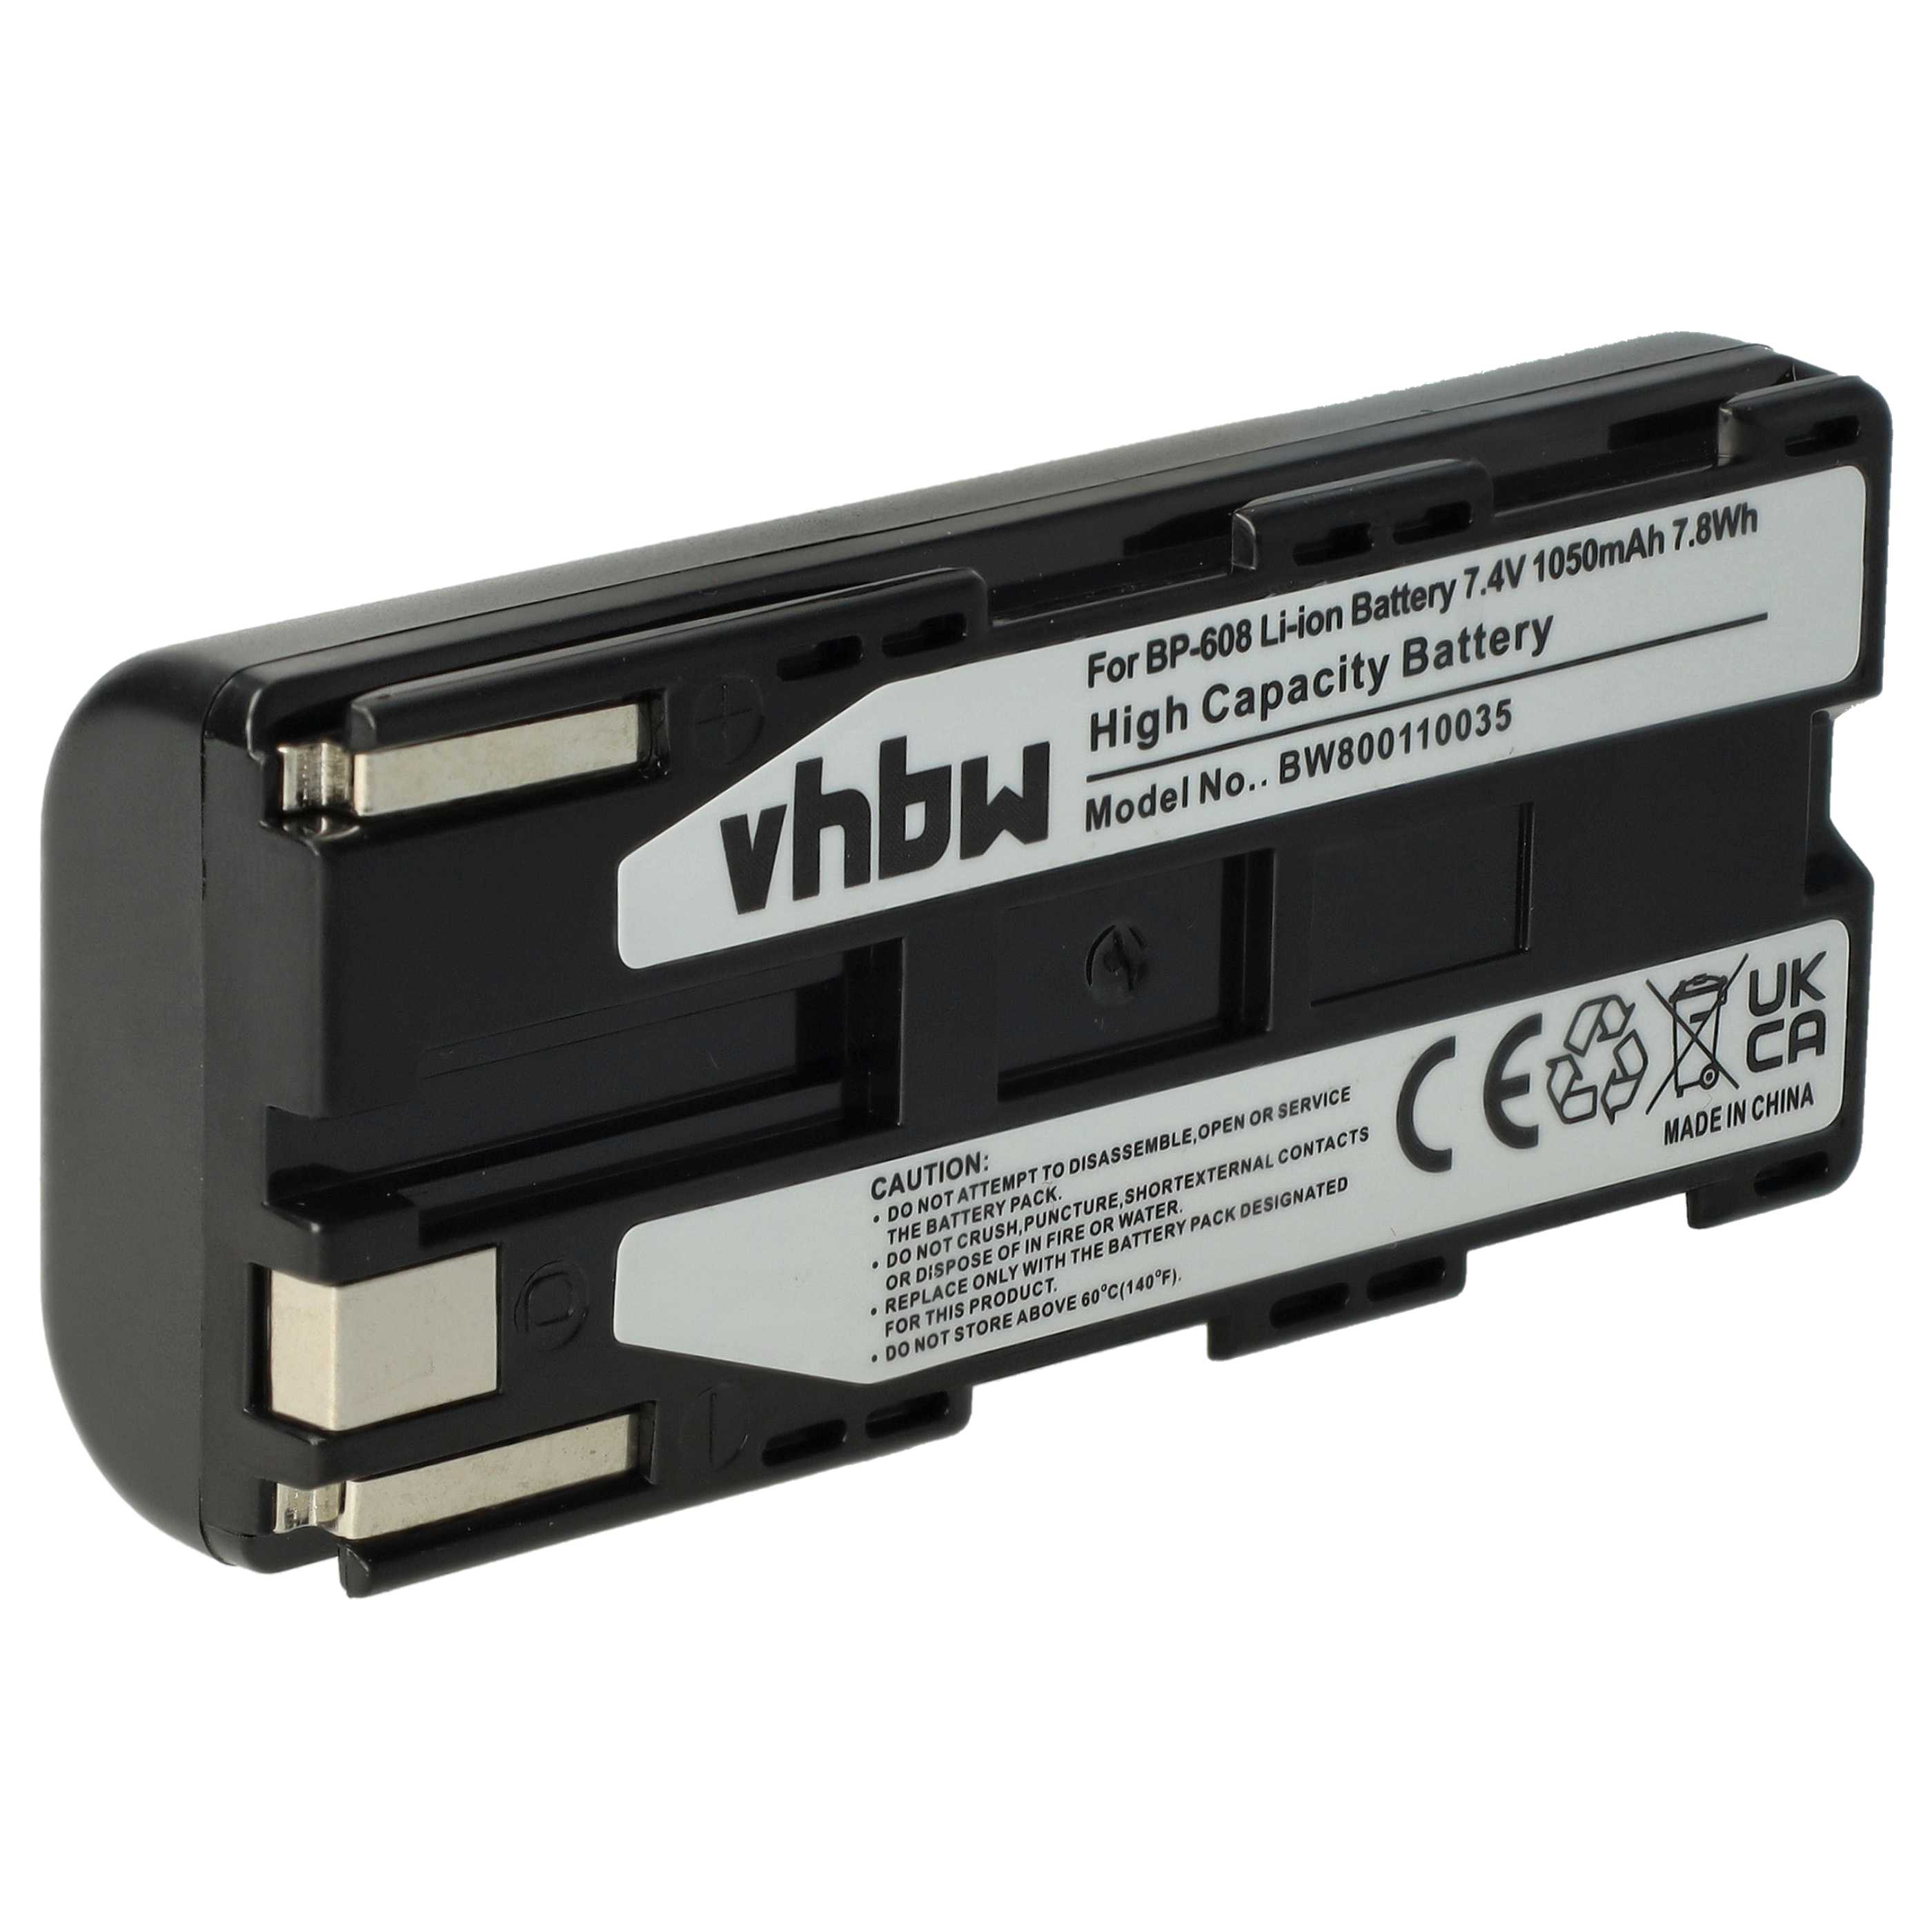 Videocamera Battery Replacement for Canon BP-608, BP-608A - 1050 mAh 7.4 V Li-Ion